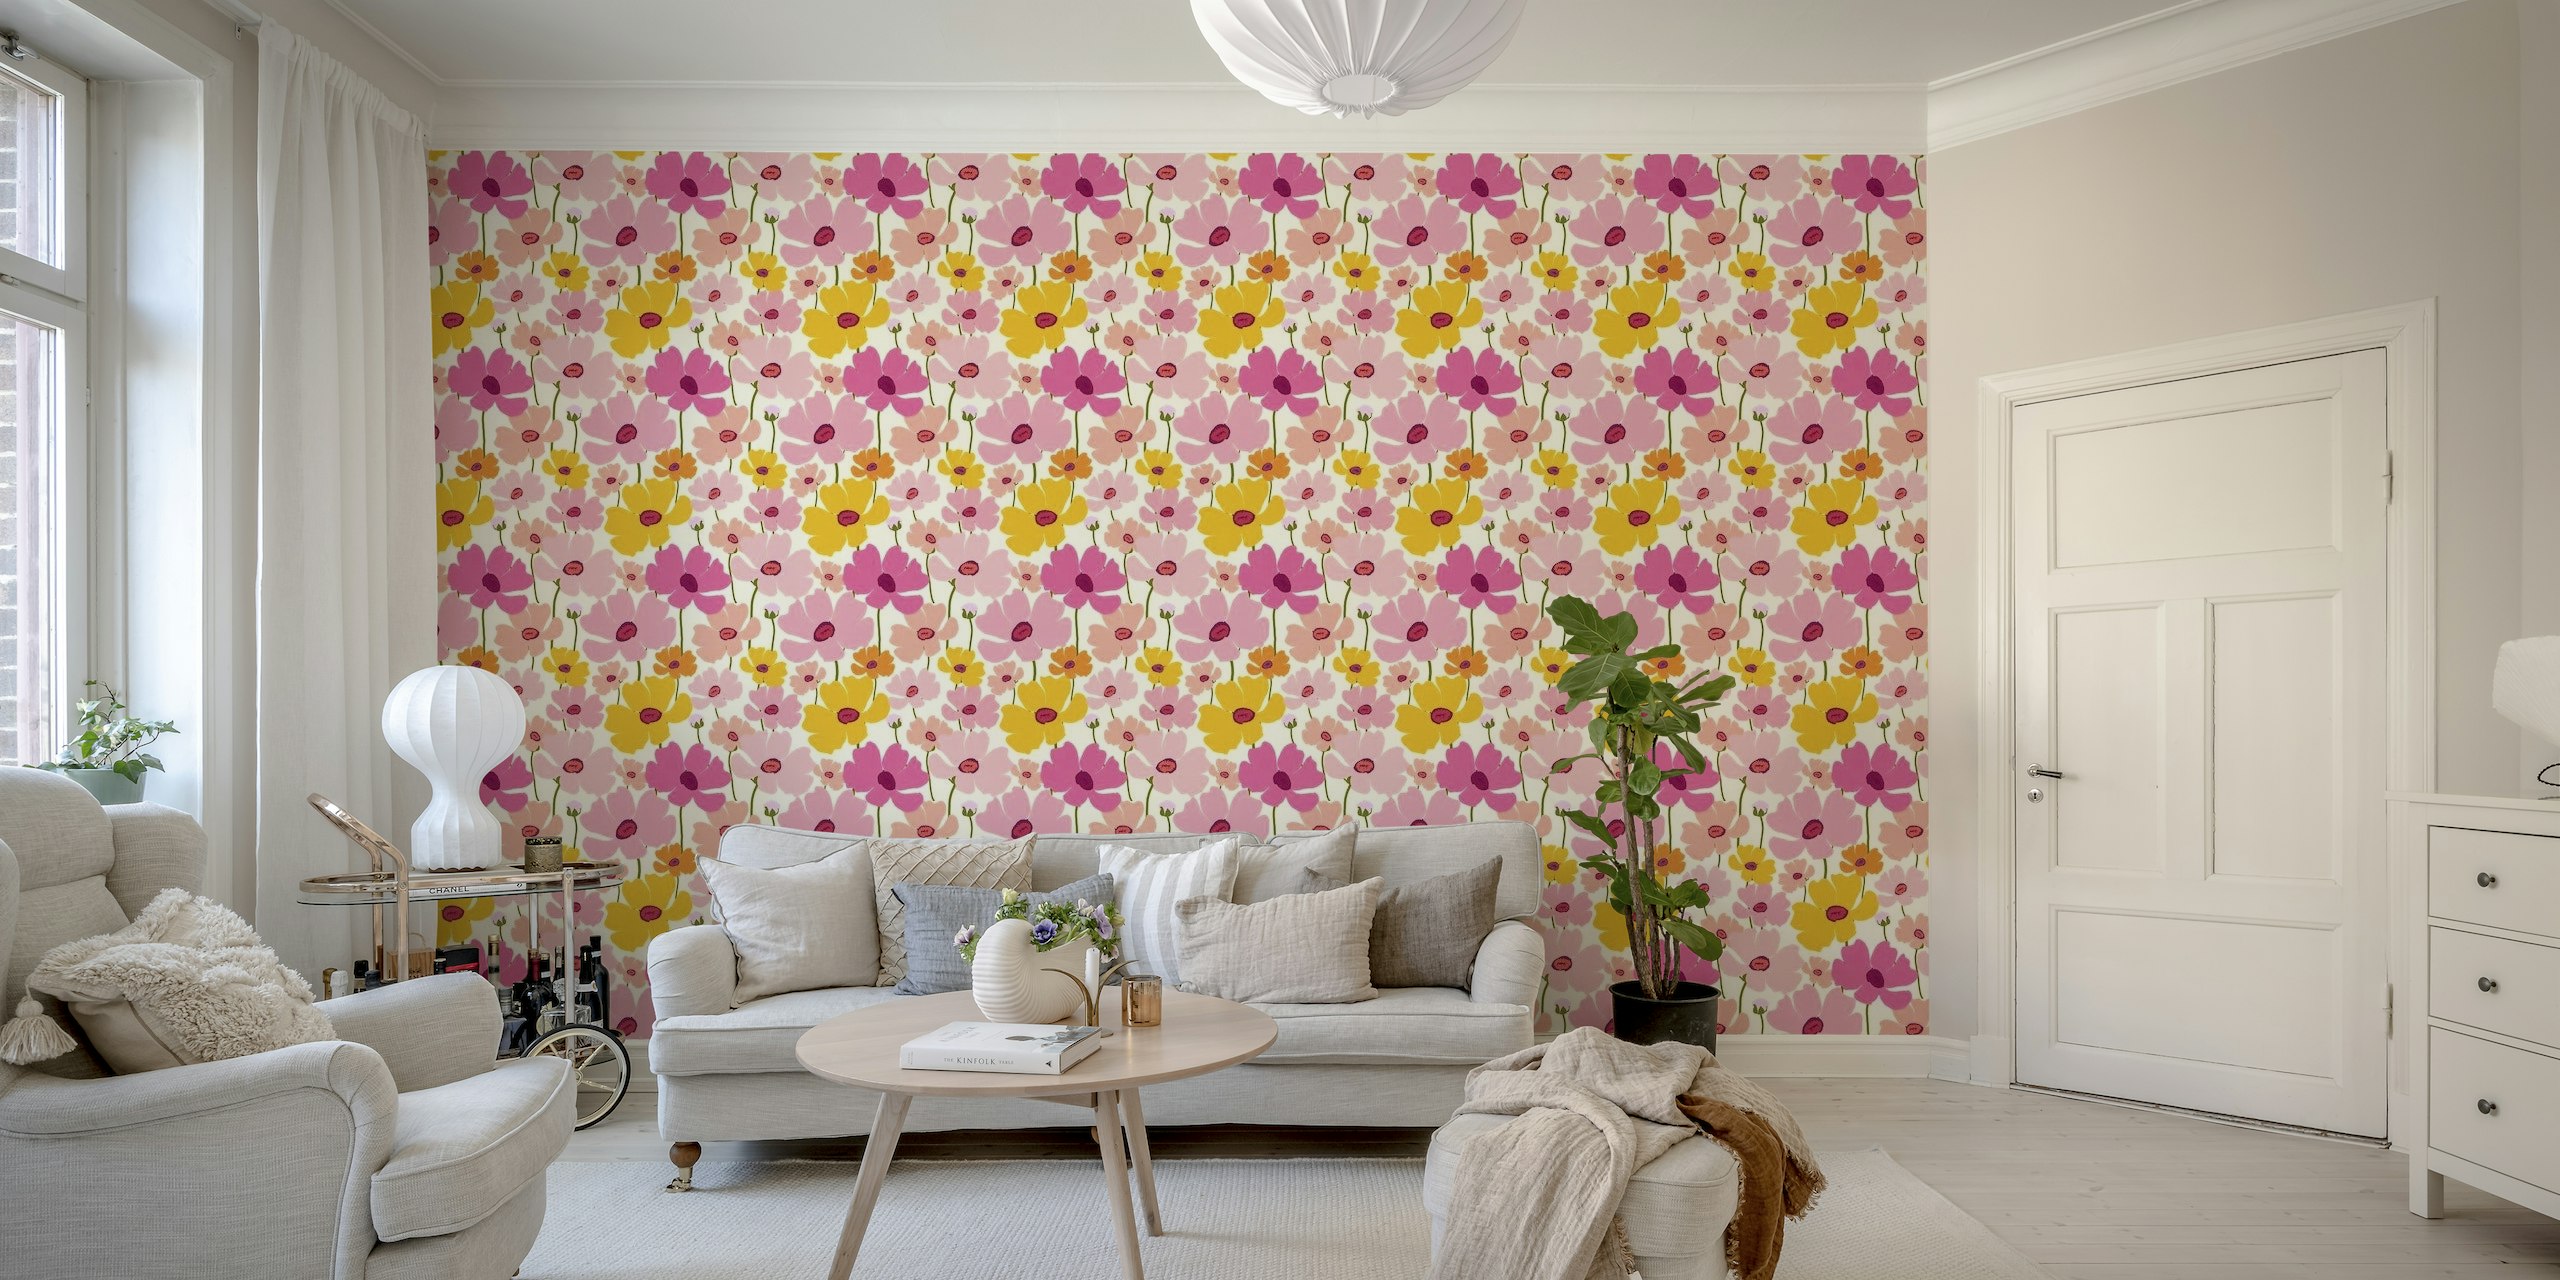 Illustration of a vibrant 'Buttercup Field' wall mural with pink and yellow flowers and green foliage.